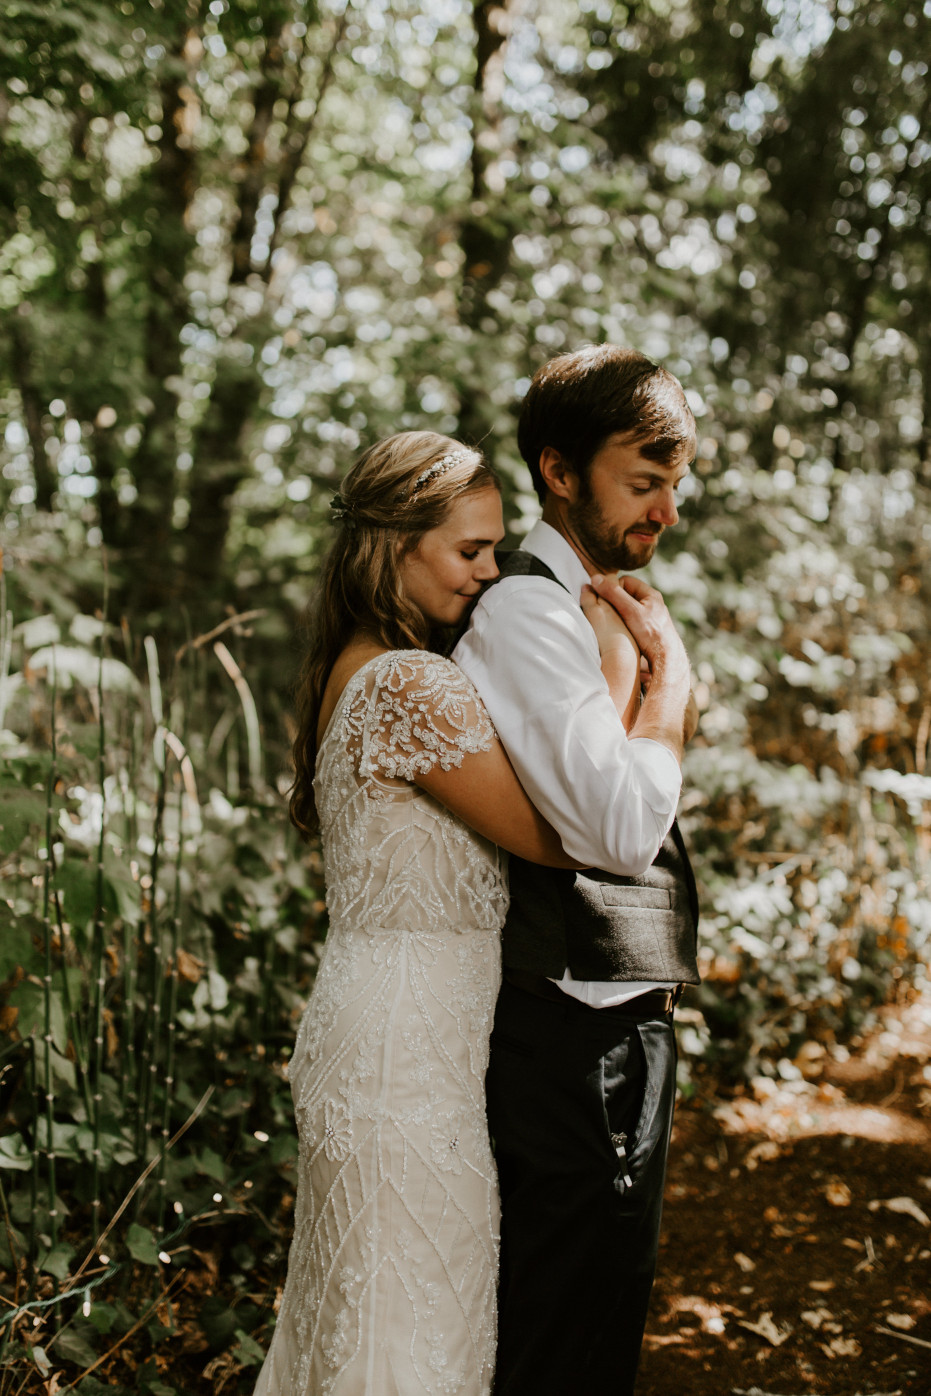 Hannah and Dan embrace in Corvallis, Oregon. Intimate wedding photography in Corvallis Oregon by Sienna Plus Josh.